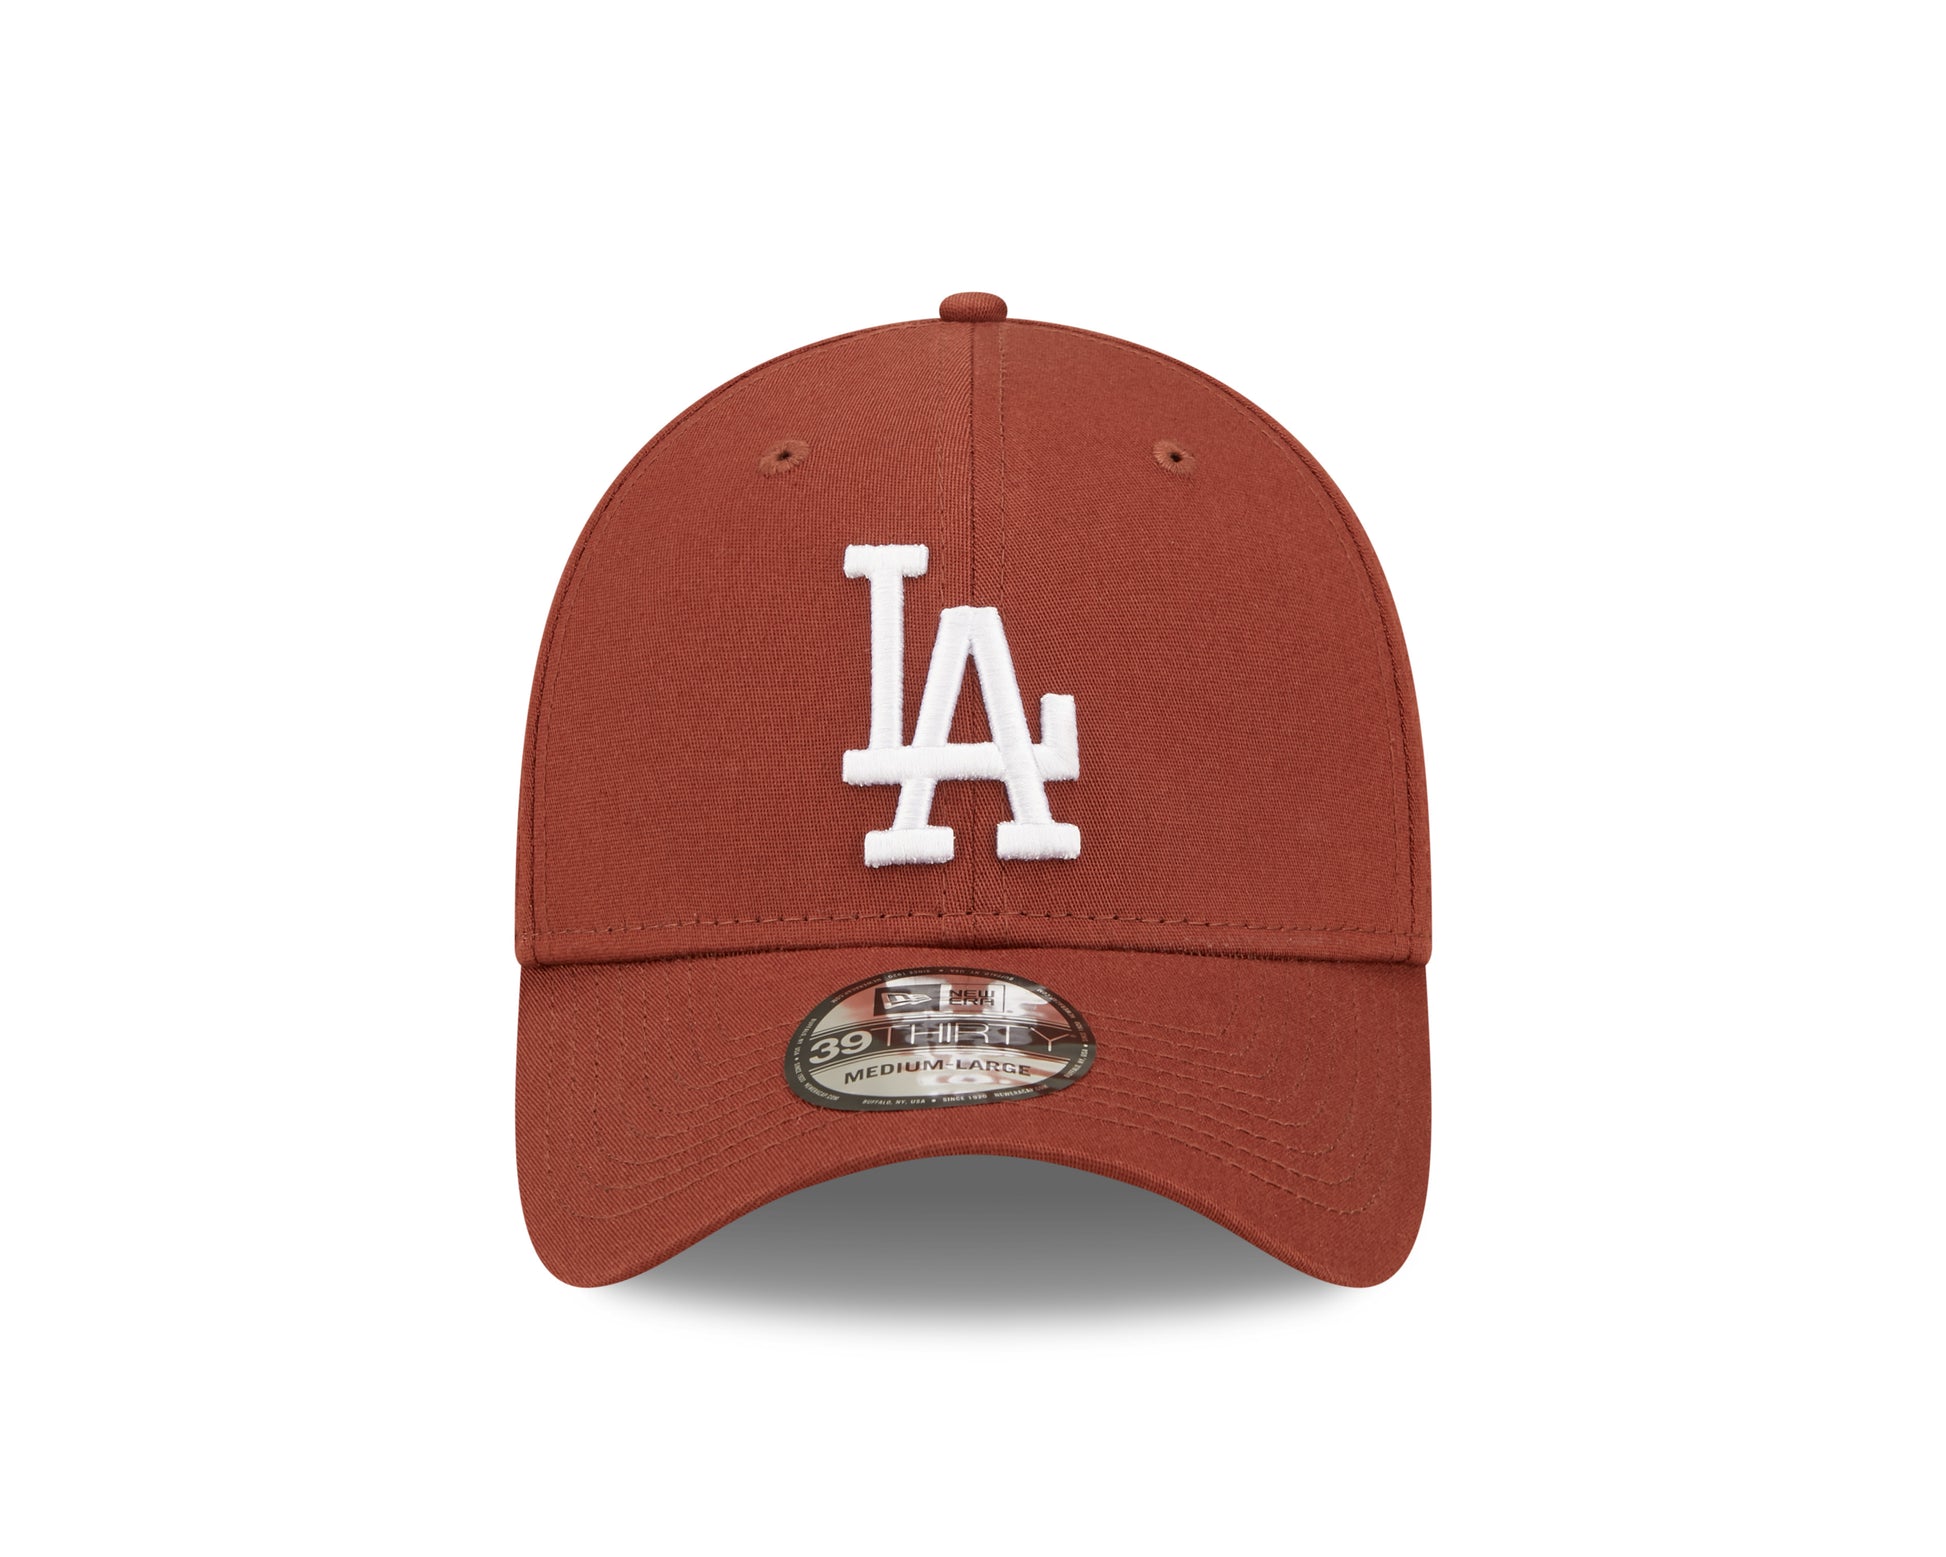 39Thirty League Essential - Los Angeles Dodgers Brown/White